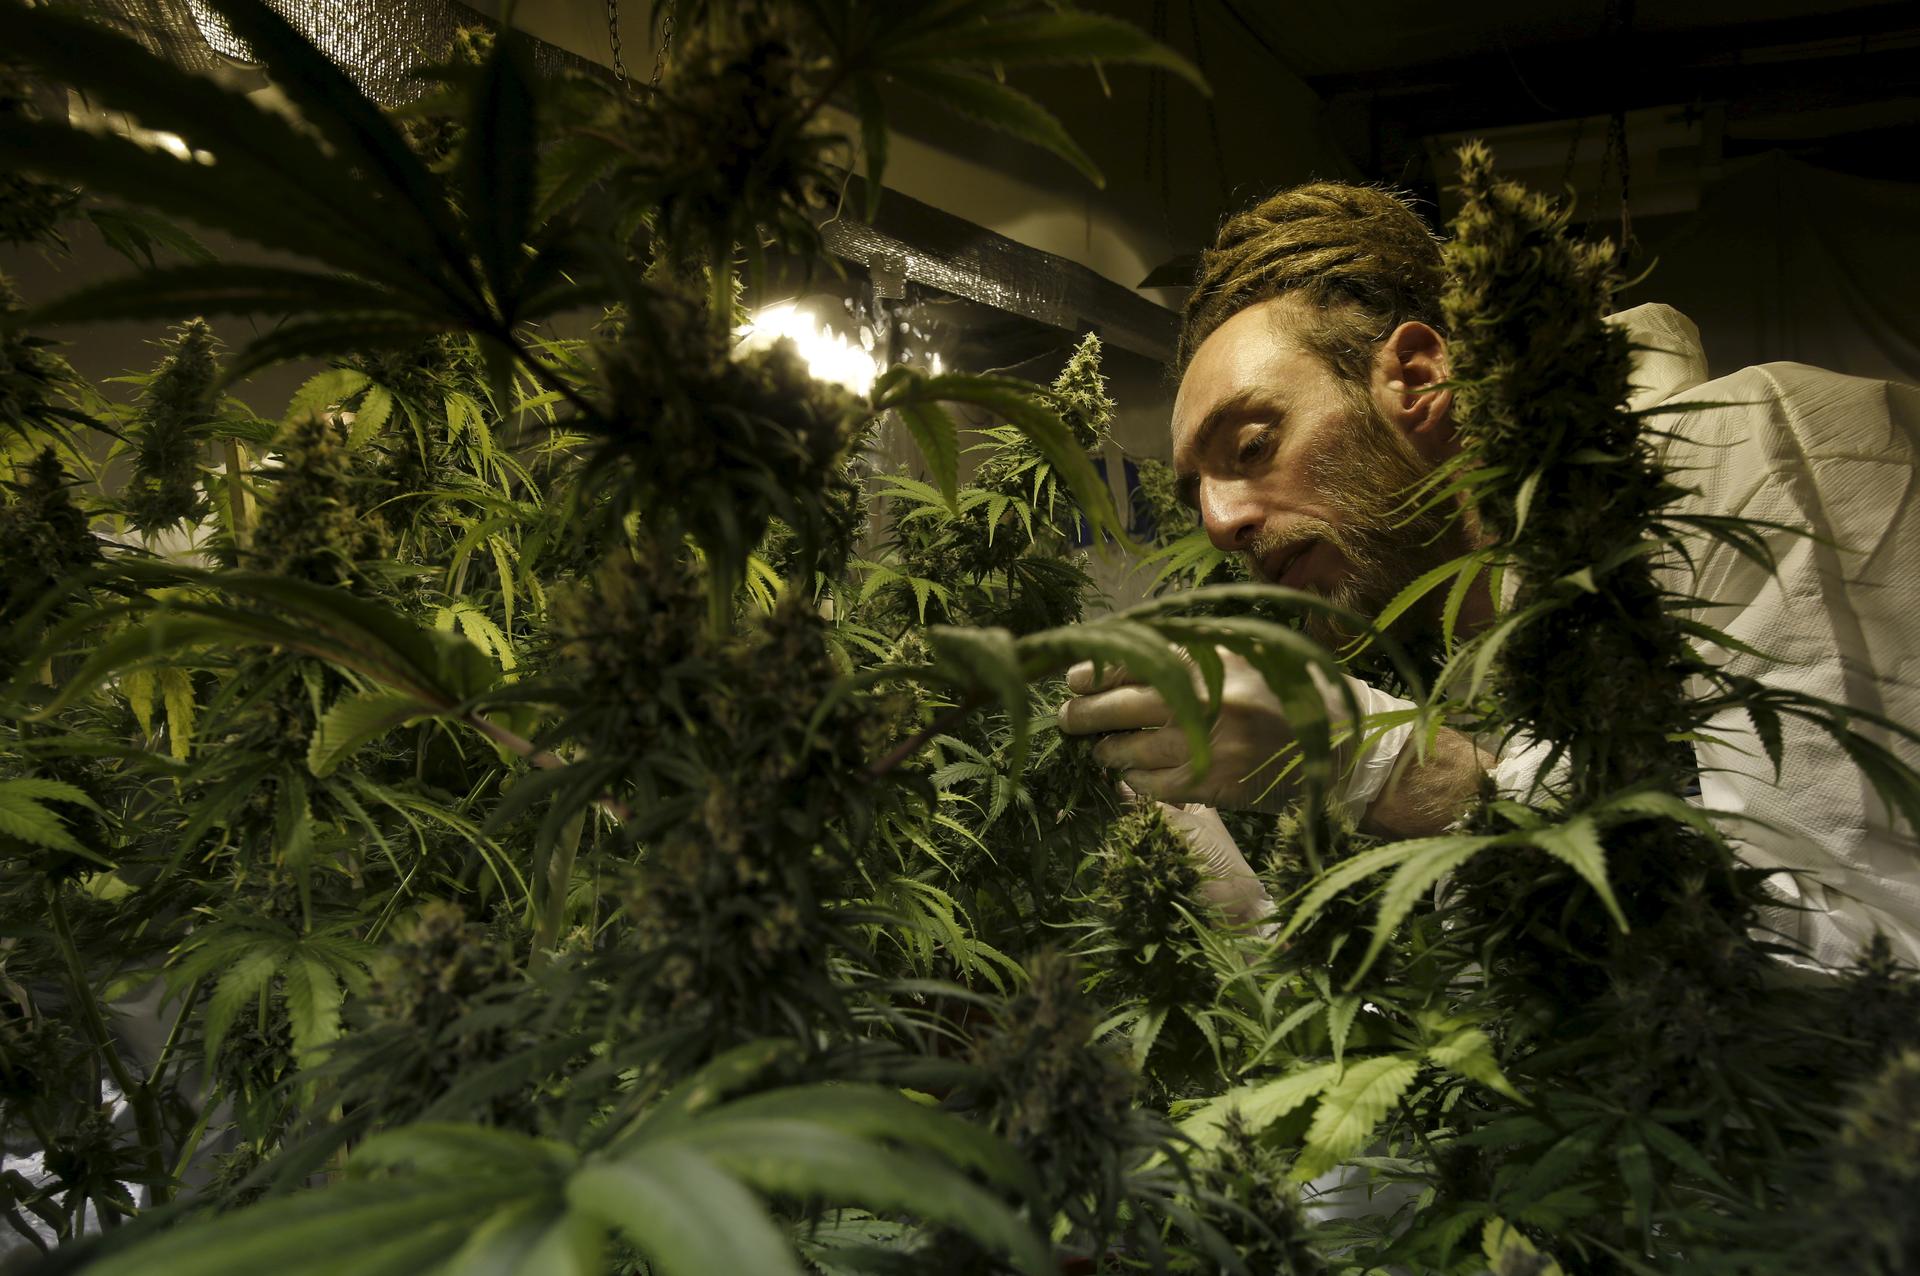 Grower Denis Contry checks out his marijuana plants at the Ganja Farms store in Bogota, Colombia, which recently legalized medical marijuana.